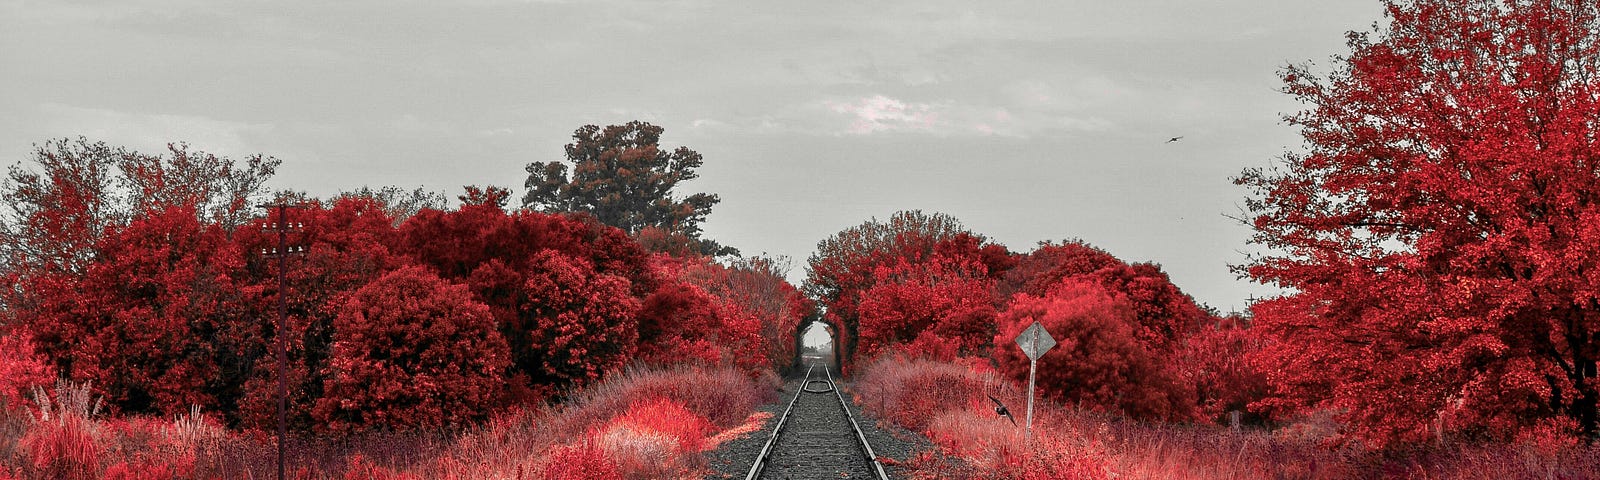 Stardust, a mythical land completely doused in red. The Lunatic view is of a railroad track with red trees and grass surrounding it.